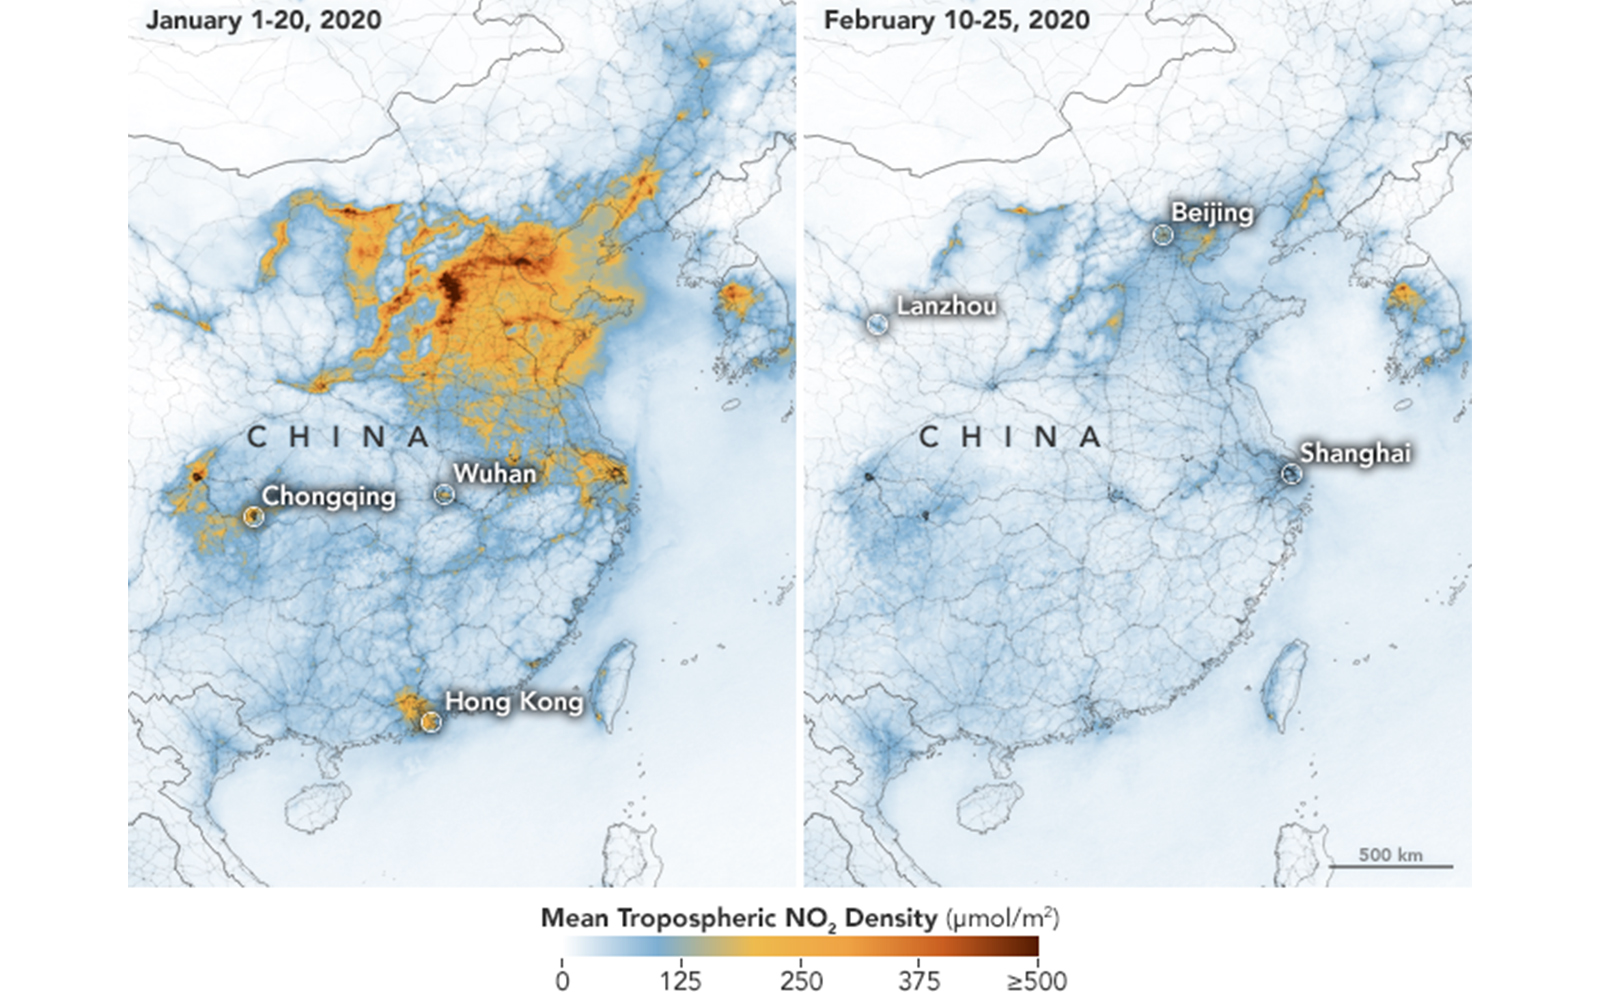 Satellite imagery shows a drop in air pollution over central and eastern China following a government imposed coronavirus quarantine. (NASA Earth Observatory/Joshua Stevens)